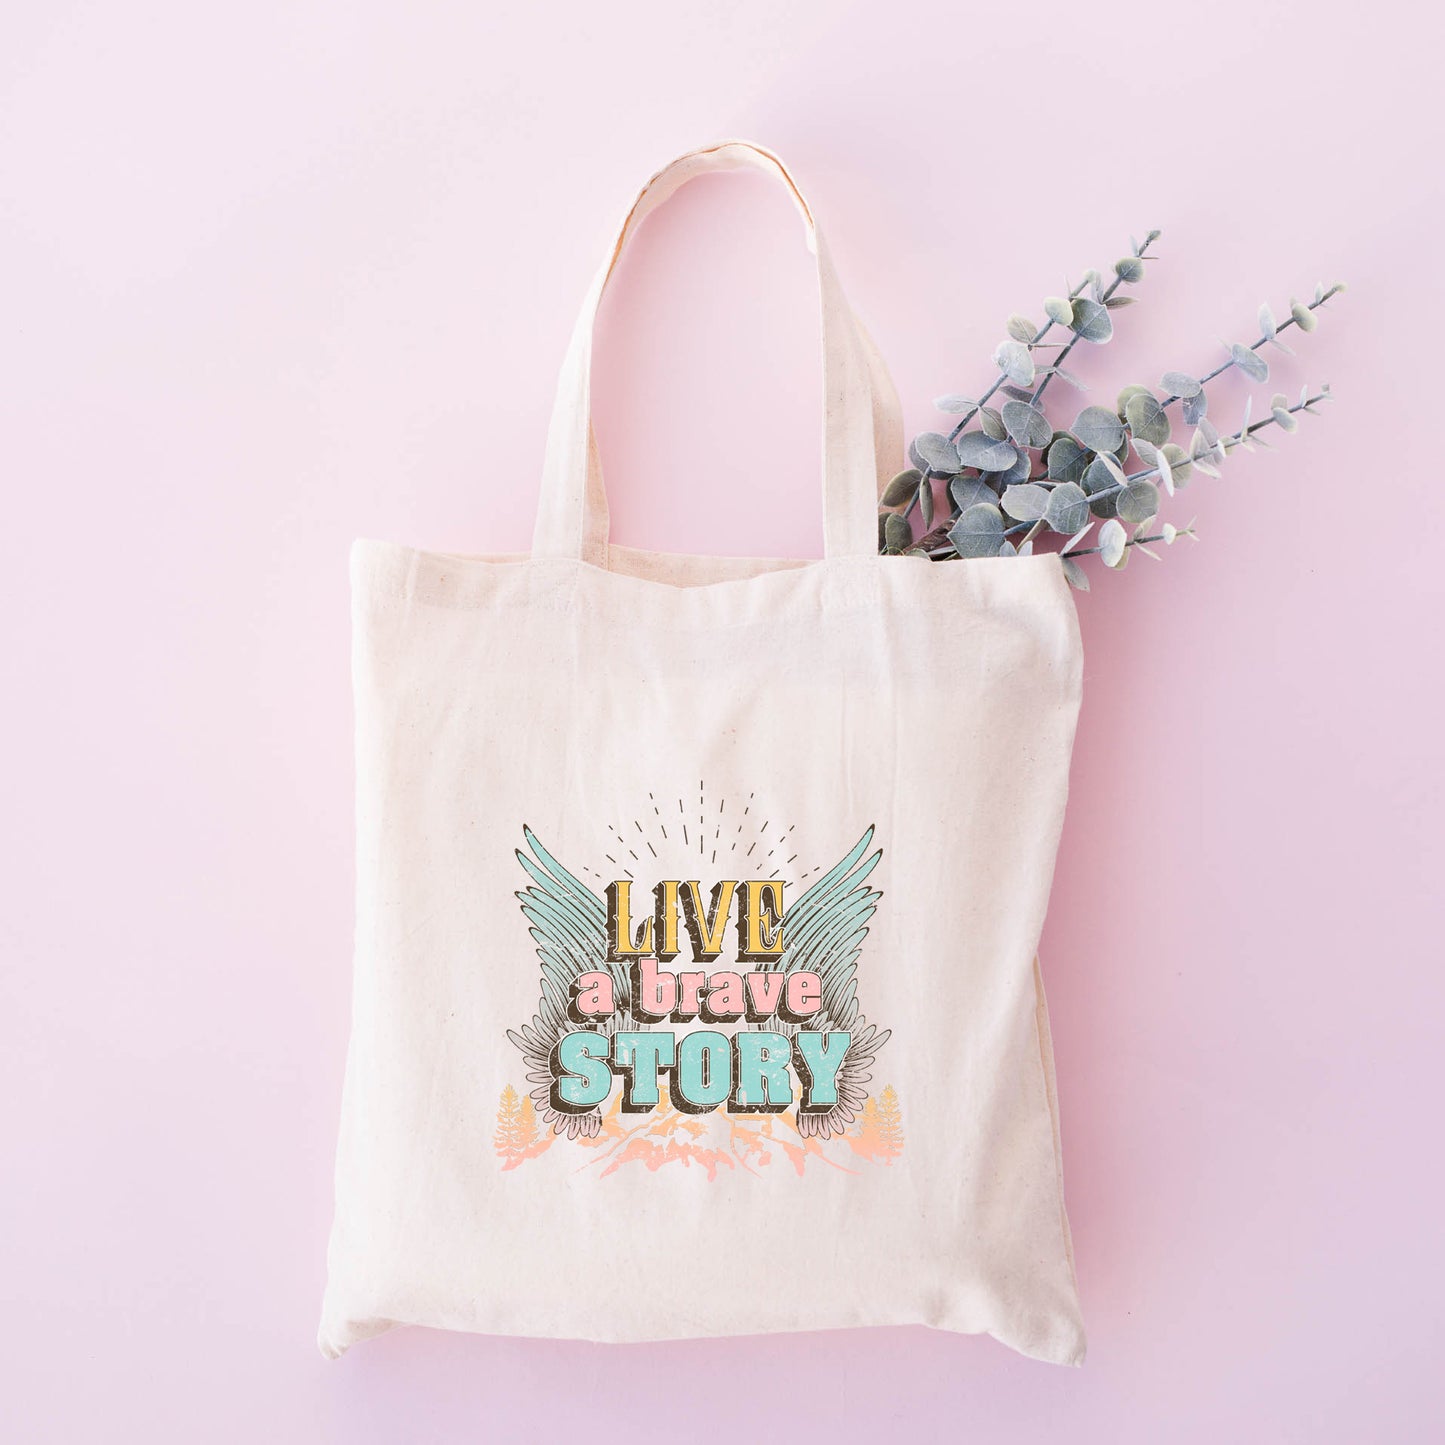 Live A Brave Story | Tote Bag